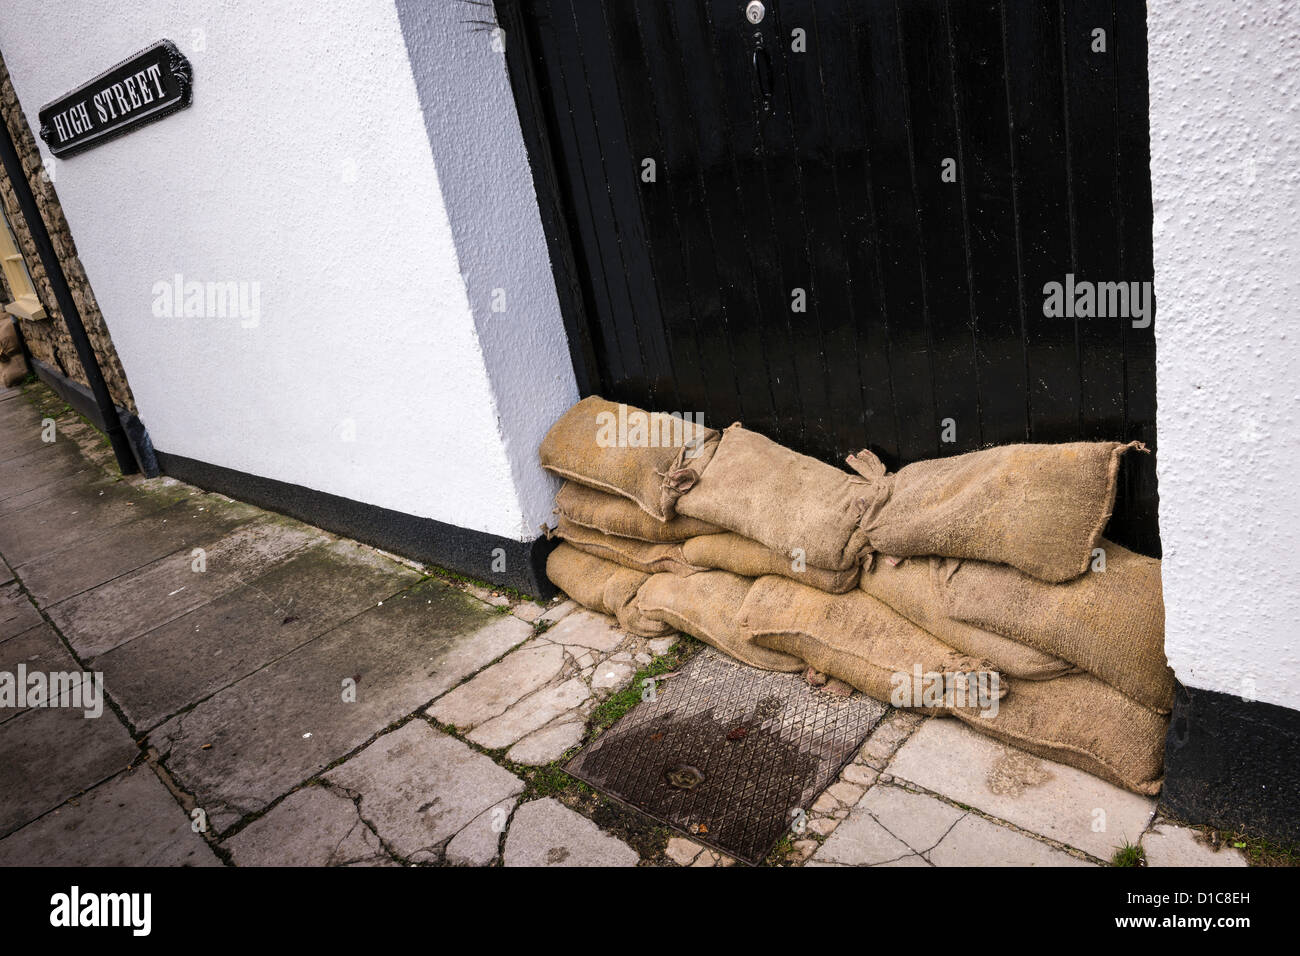 An image of the sandbags used in vain to hold back the torrent of floodwater which hit the Wiltshire town of Malmesbury on 25th November 2012. Stock Photo